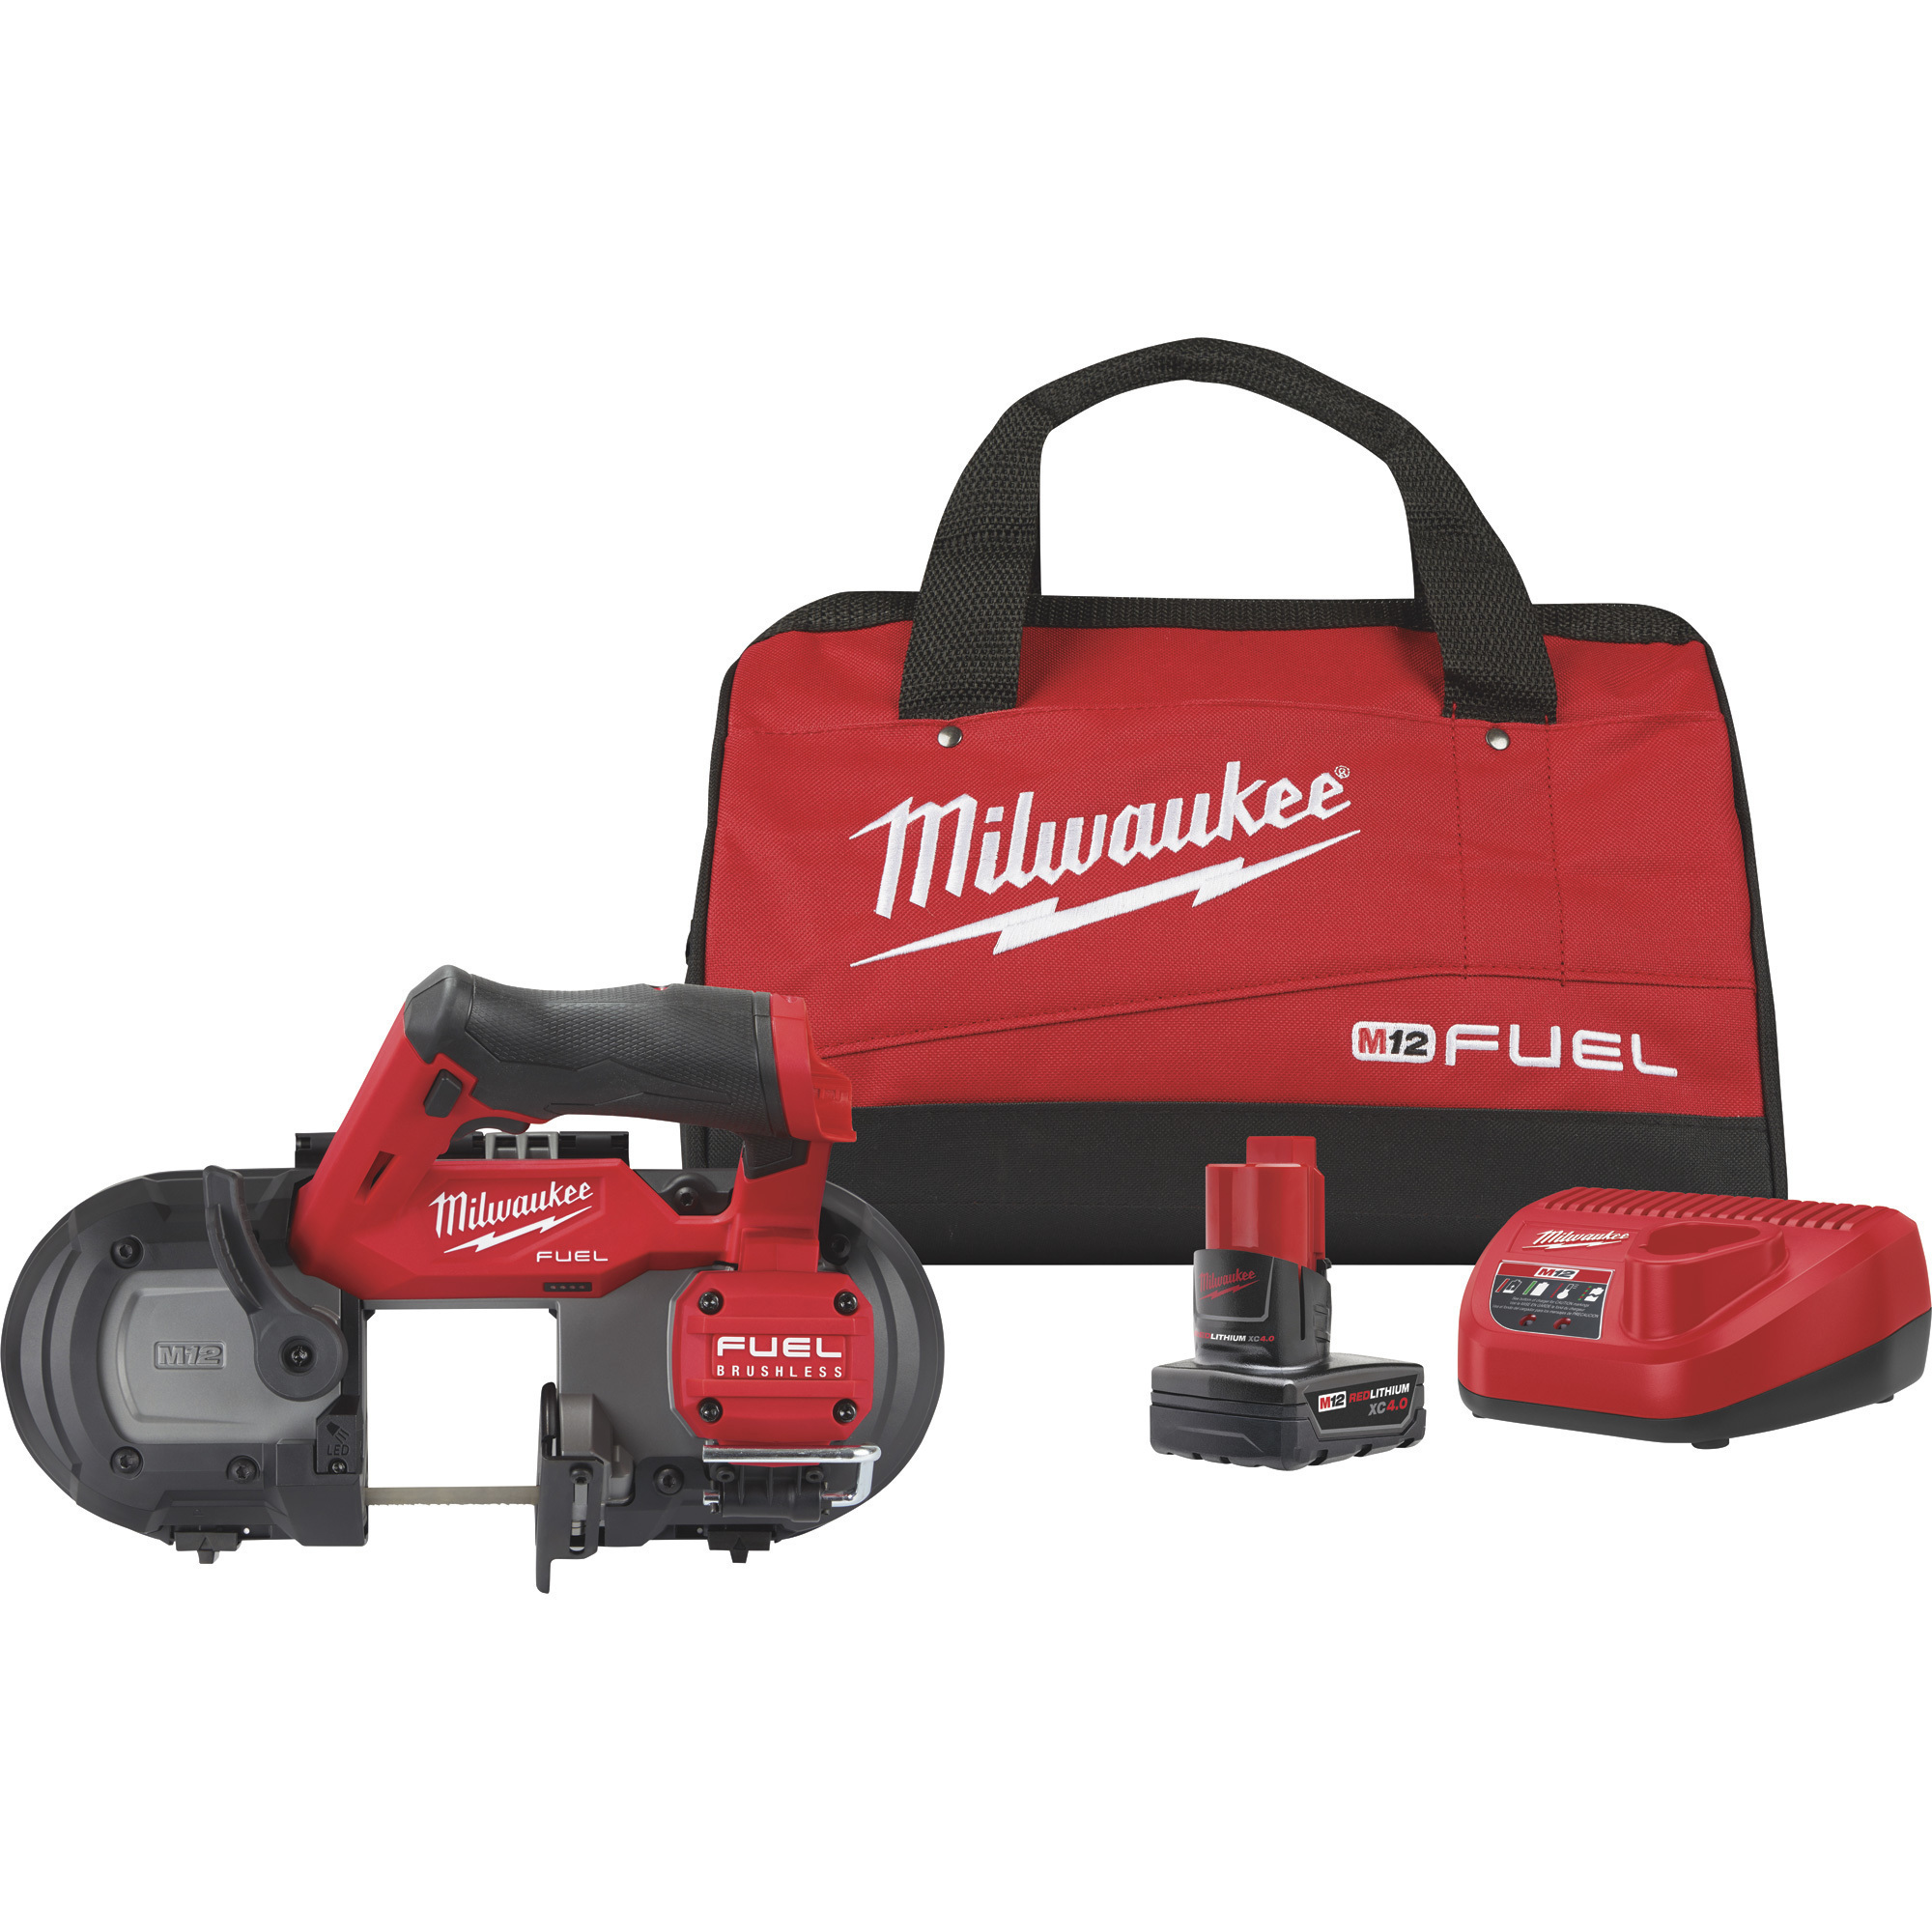 Milwaukee M12 FUEL Compact Band Saw Kit, Includes Battery, Model 2529-21XC